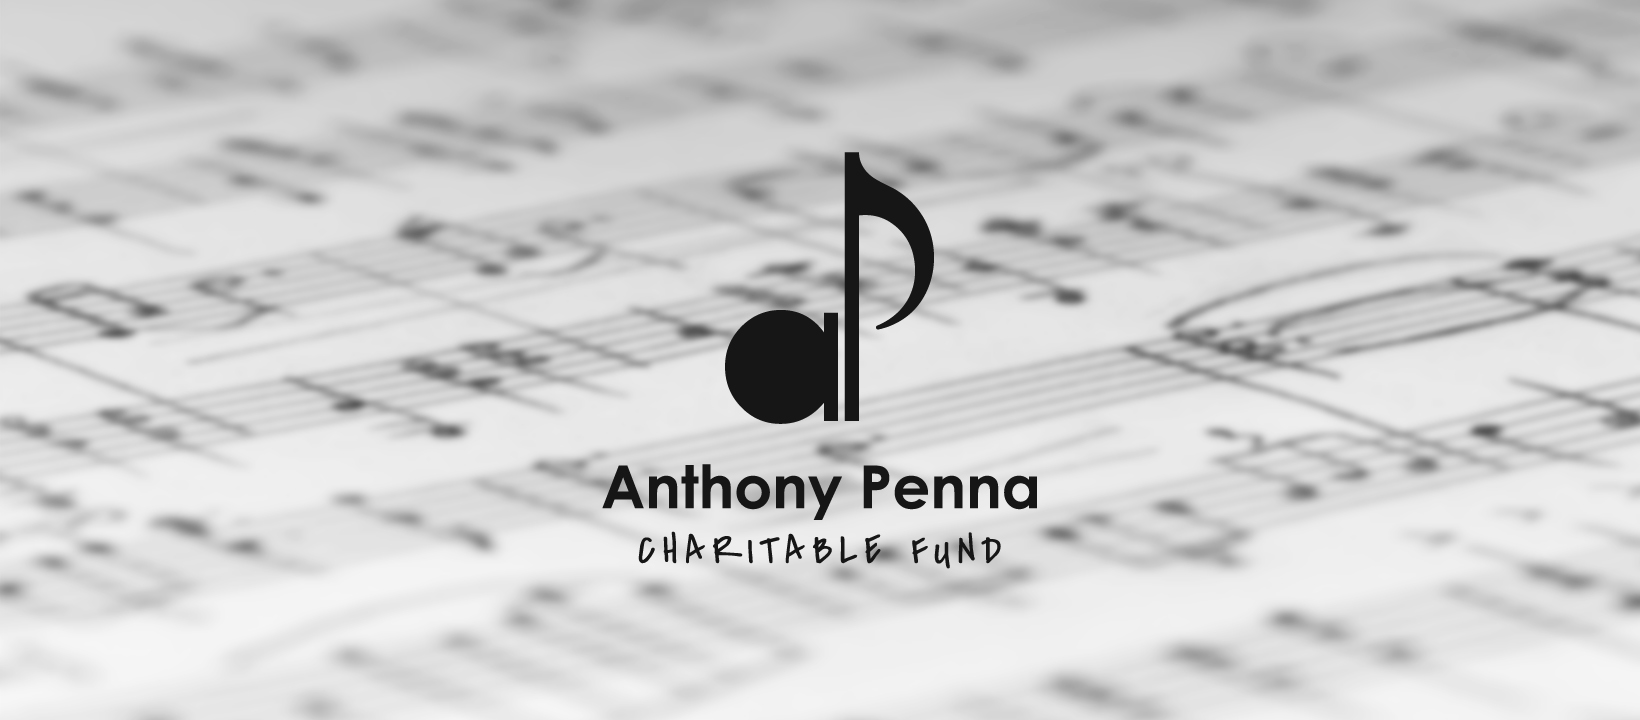 Anthony Penna Charitable Fund